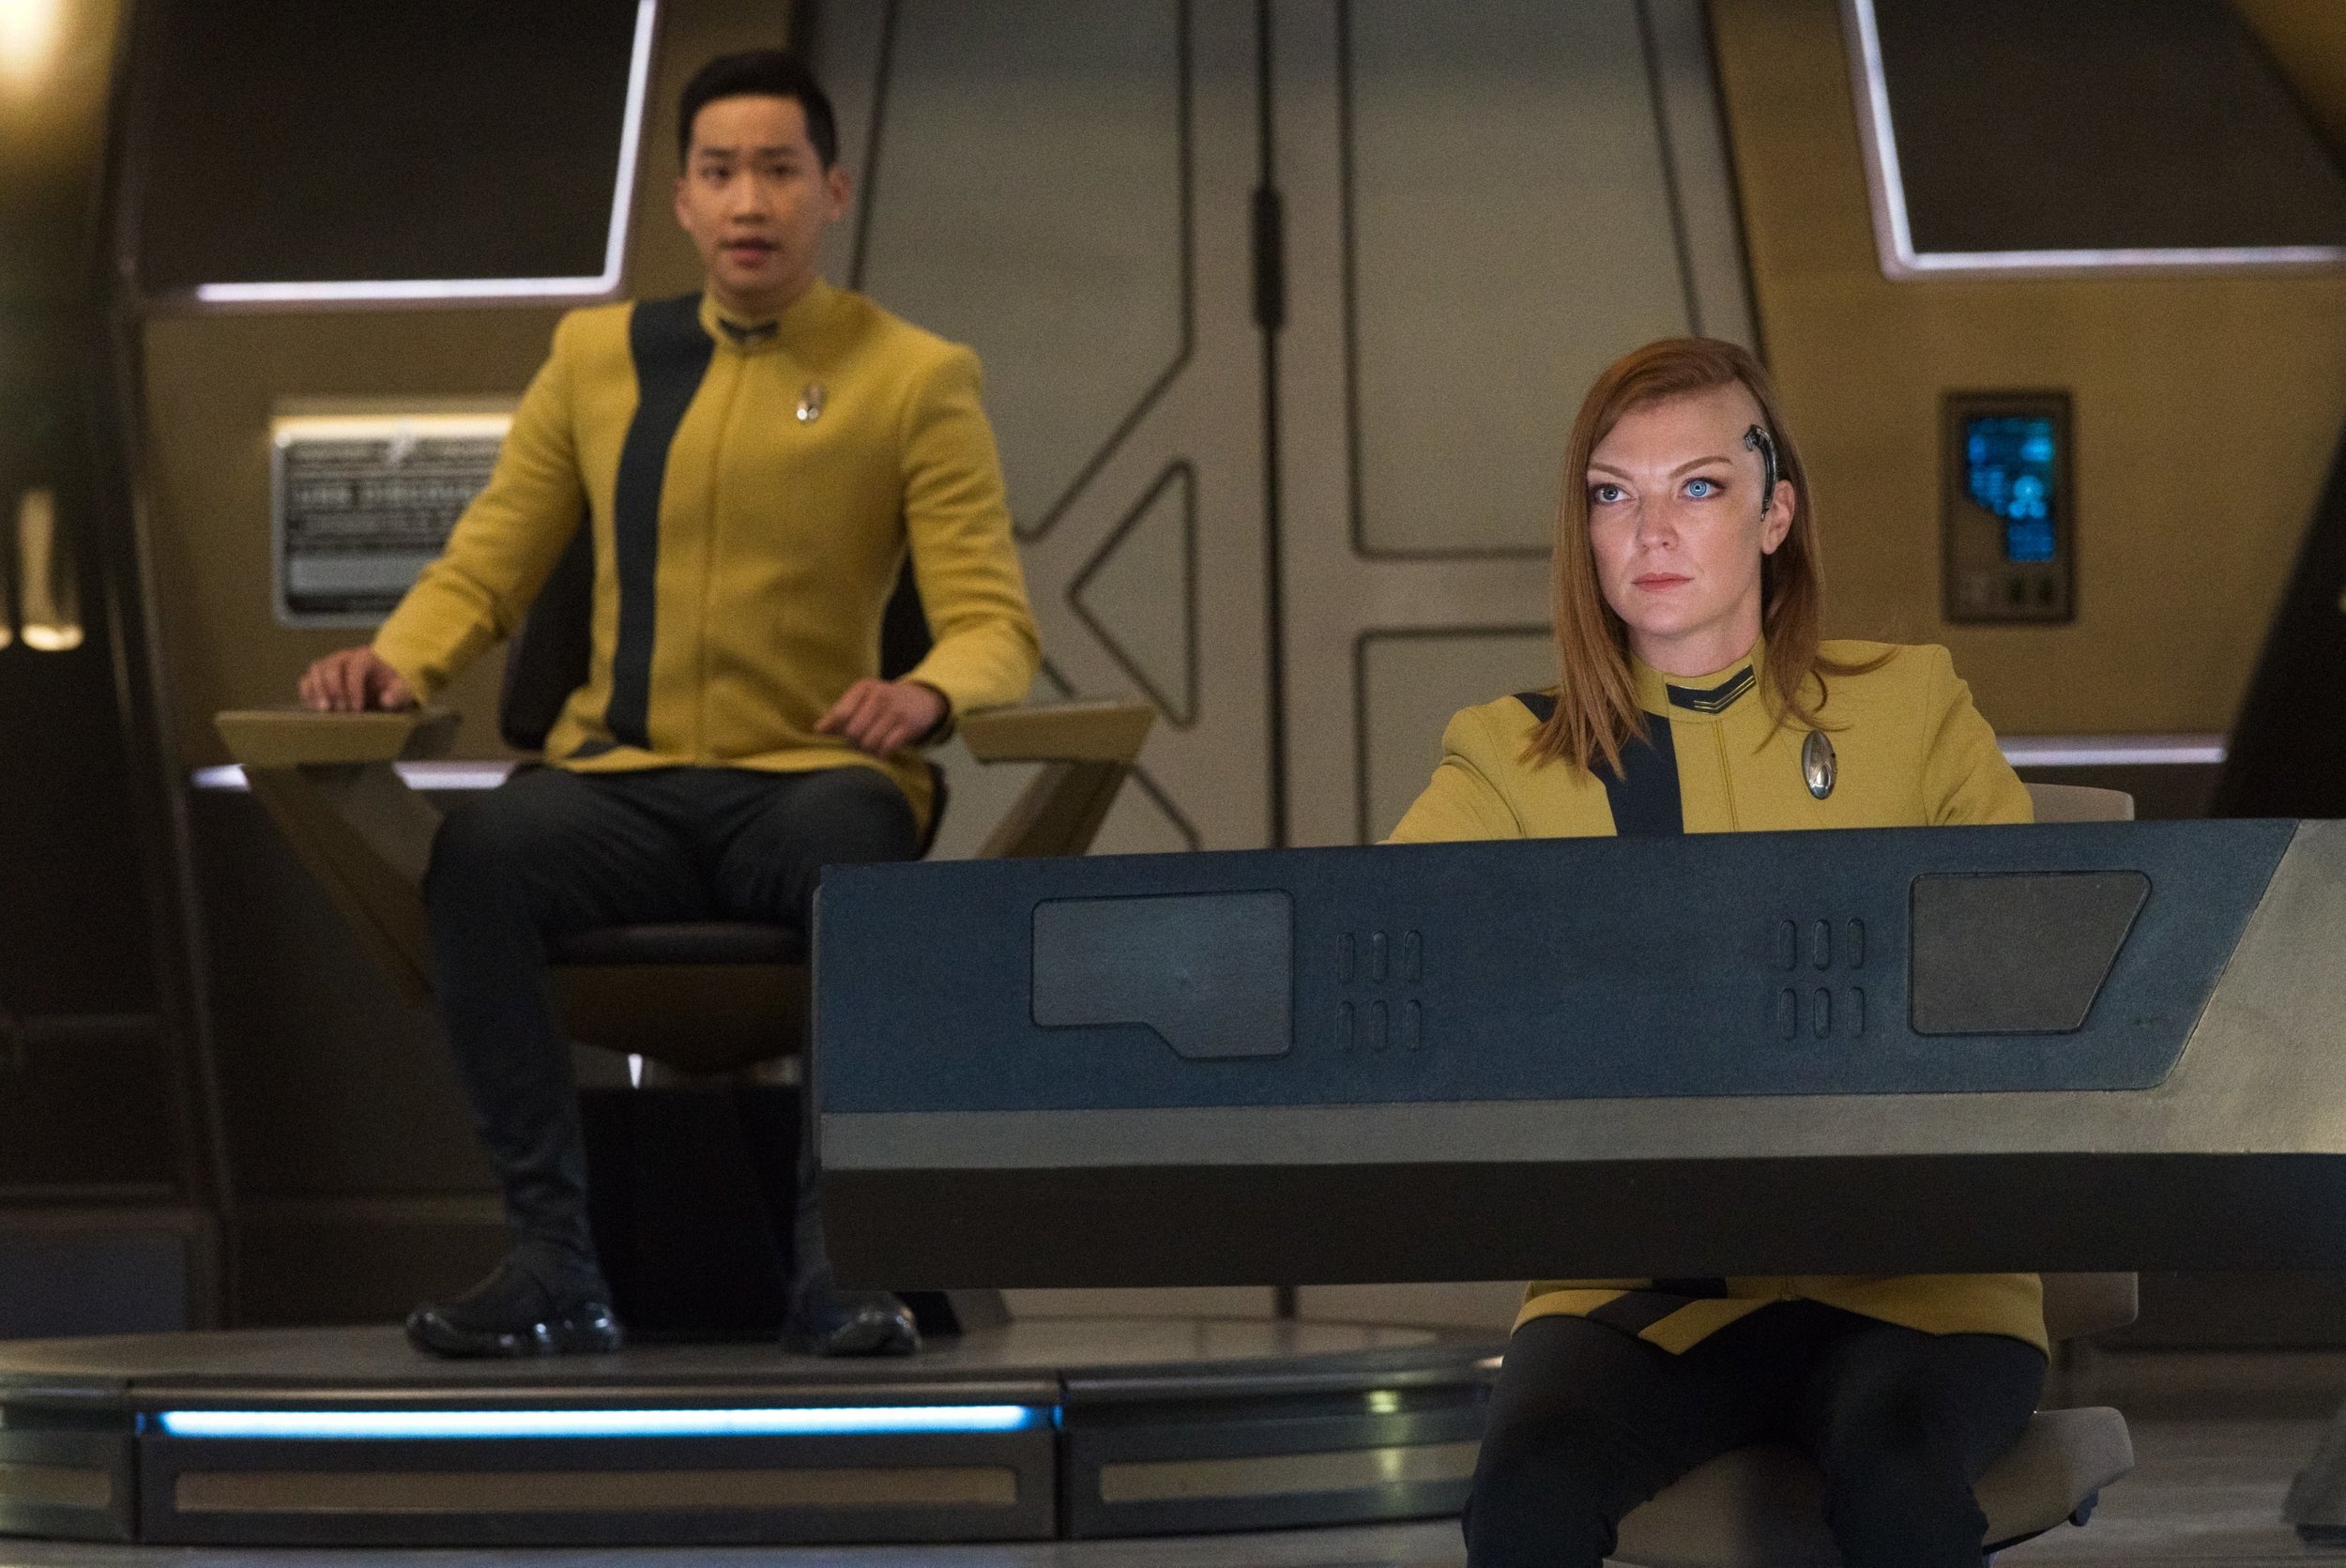   Pictured: Emily Coutts as Lt. Keyla Detmer and Patrick Kwok-Choon as Lt. Gen Rhys of the Paramount+ original series STAR TREK: DISCOVERY. Photo Cr: Michael Gibson/ViacomCBS © 2021 ViacomCBS. All Rights Reserved.  